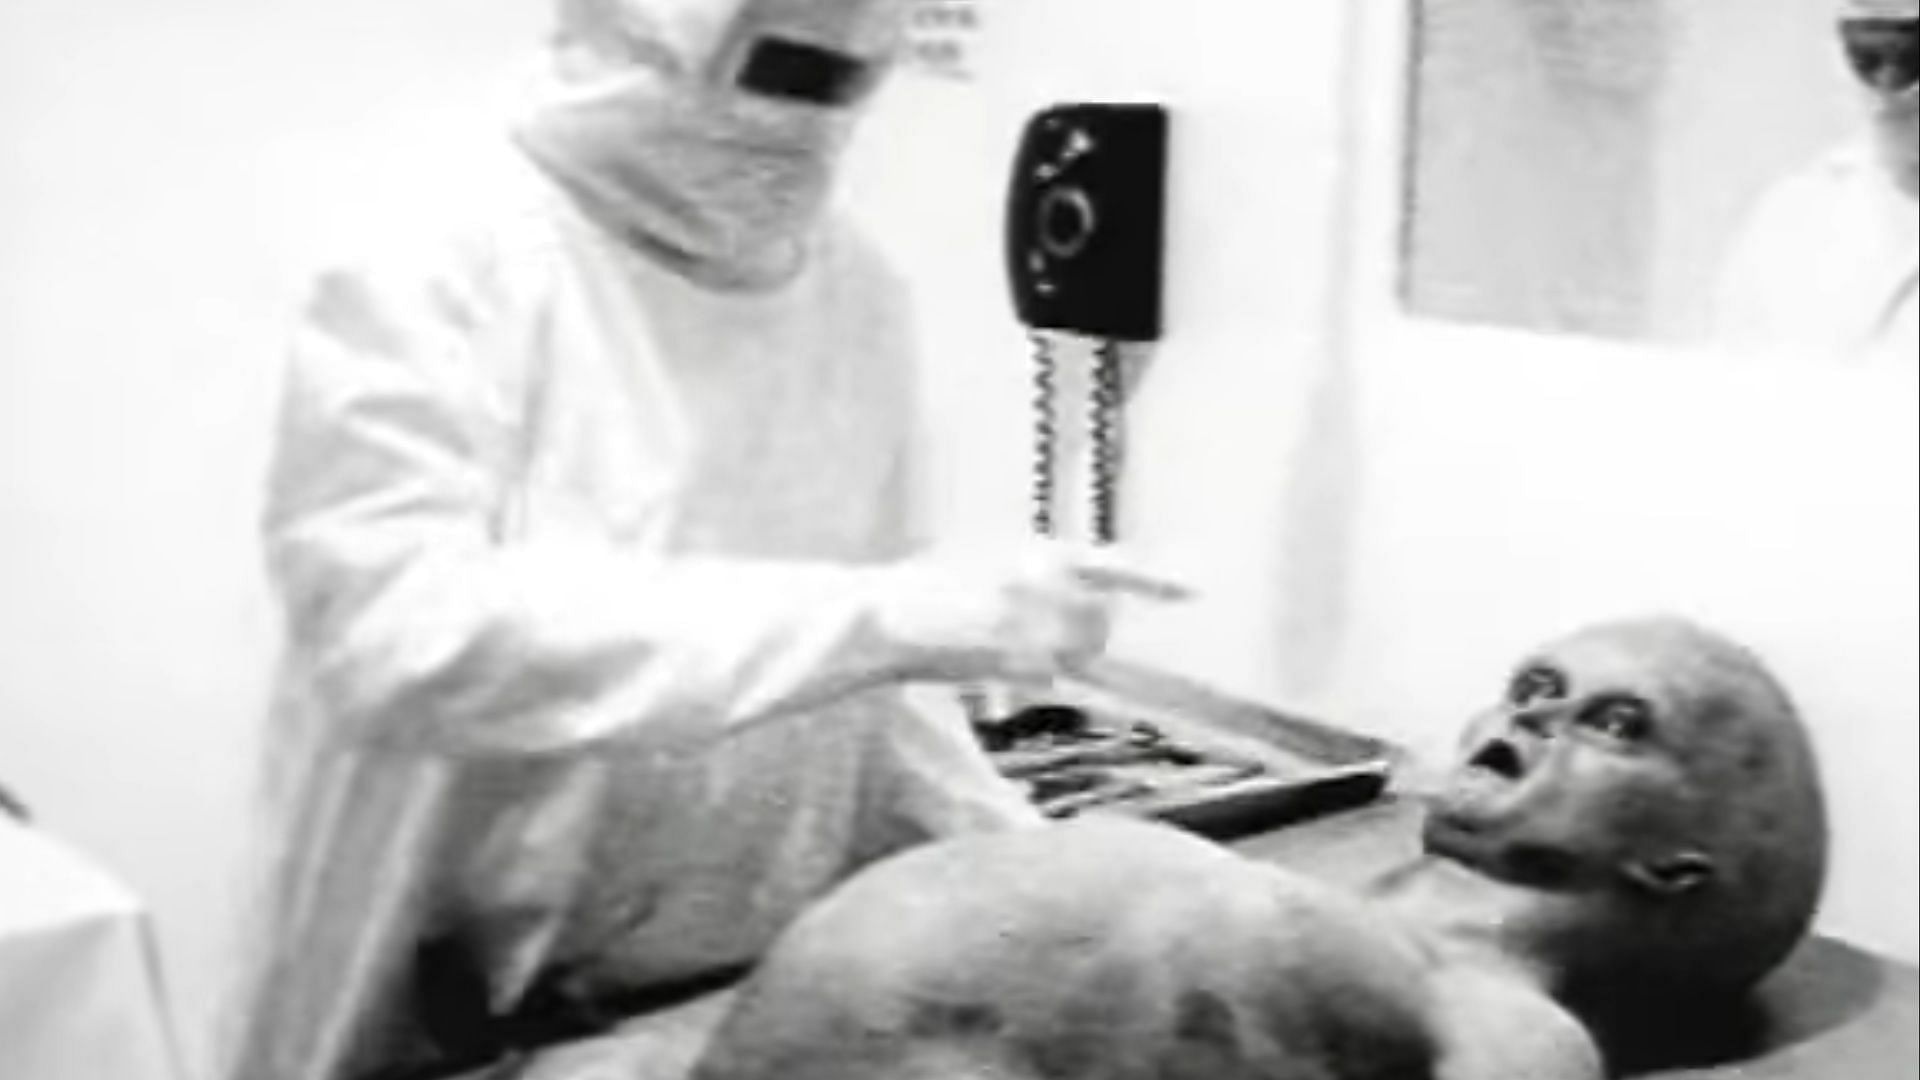 An old short film footage of a fake alien autopsy resurfaces to fascinate more generations (Image via Youtube/Spyros - Spiz)